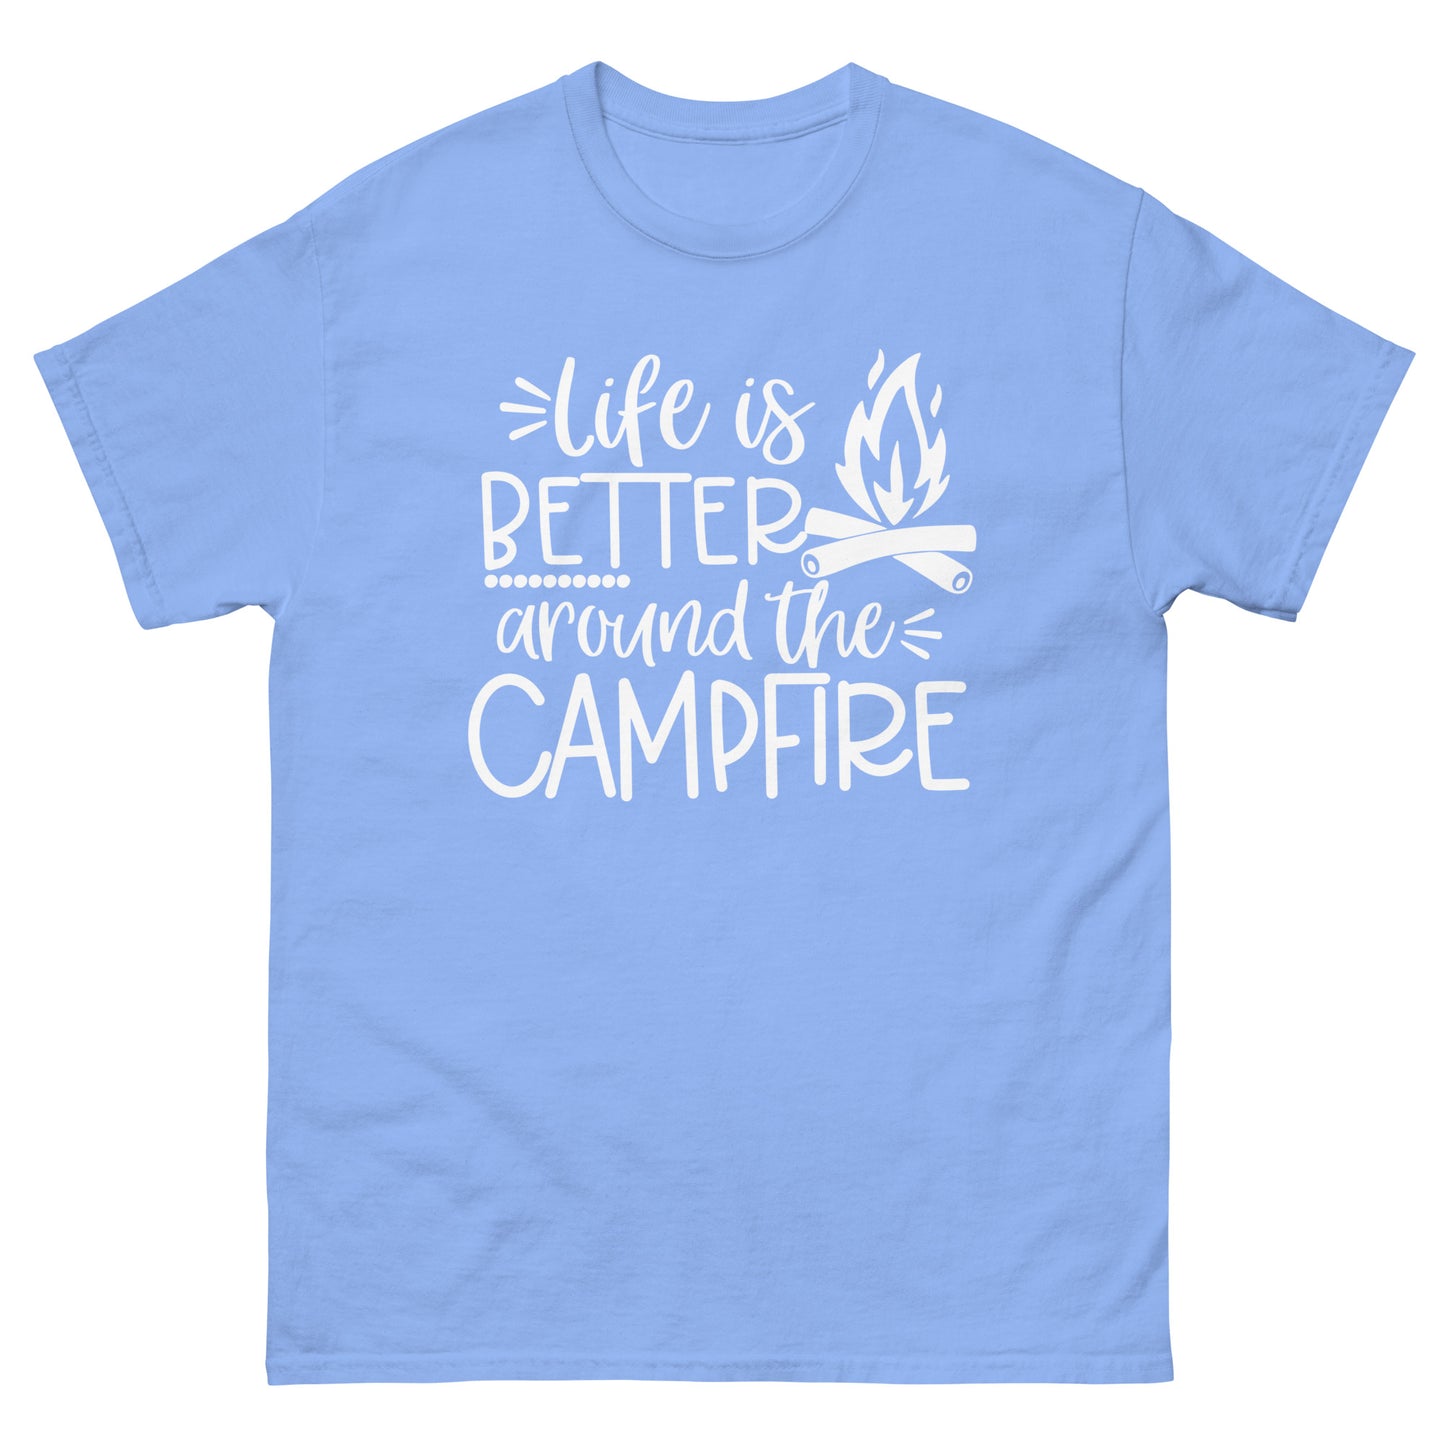 Life is better around the campfire classic tee